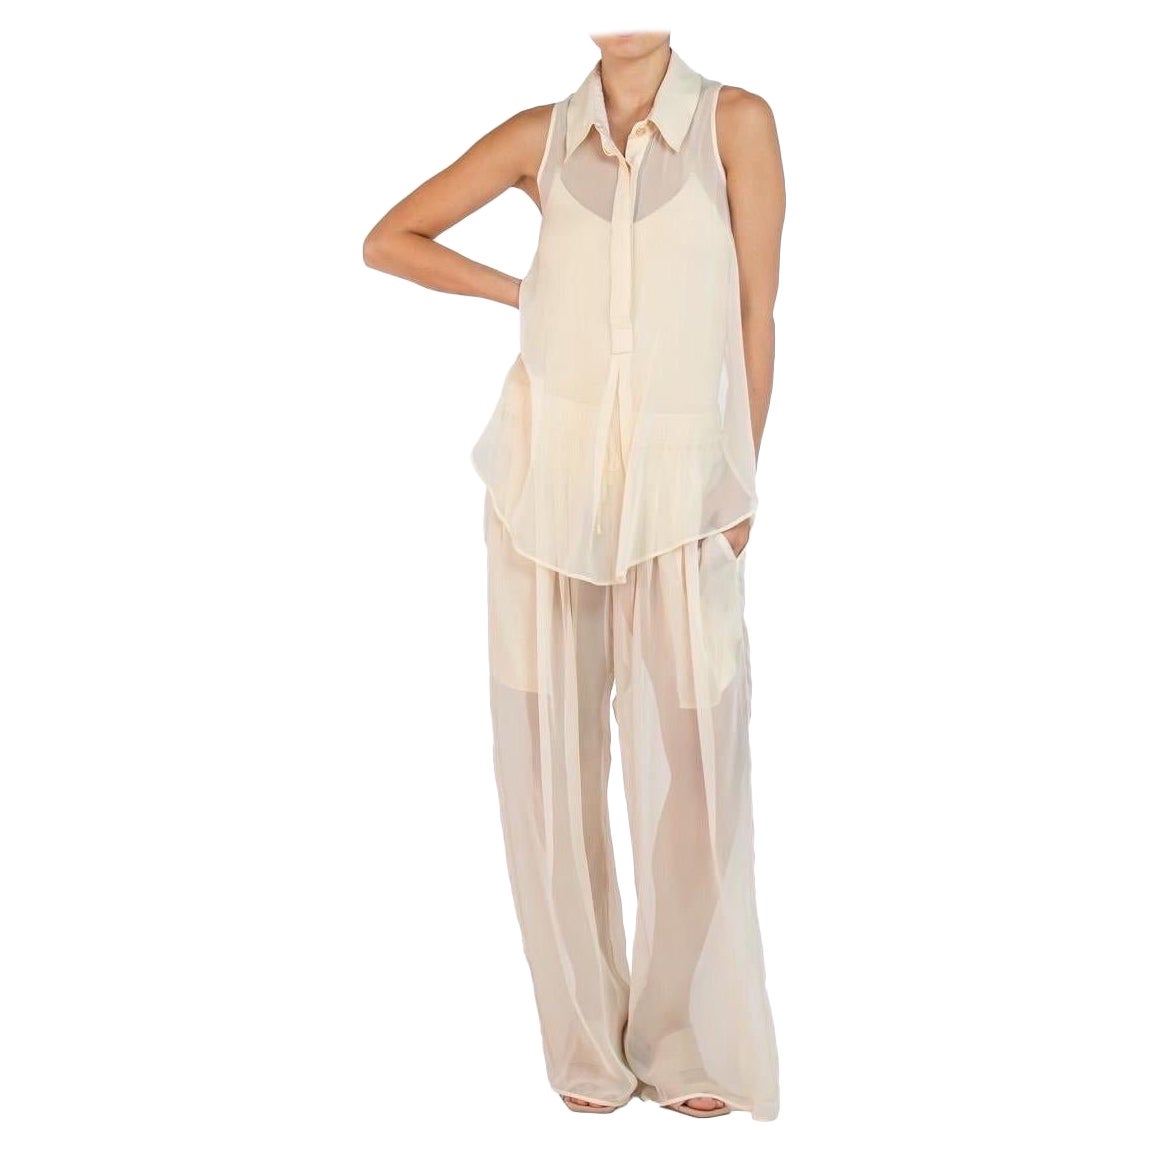 MORPHEW COLLECTION Cream Silk Chiffon & Jersey Racer Back Top For Sale